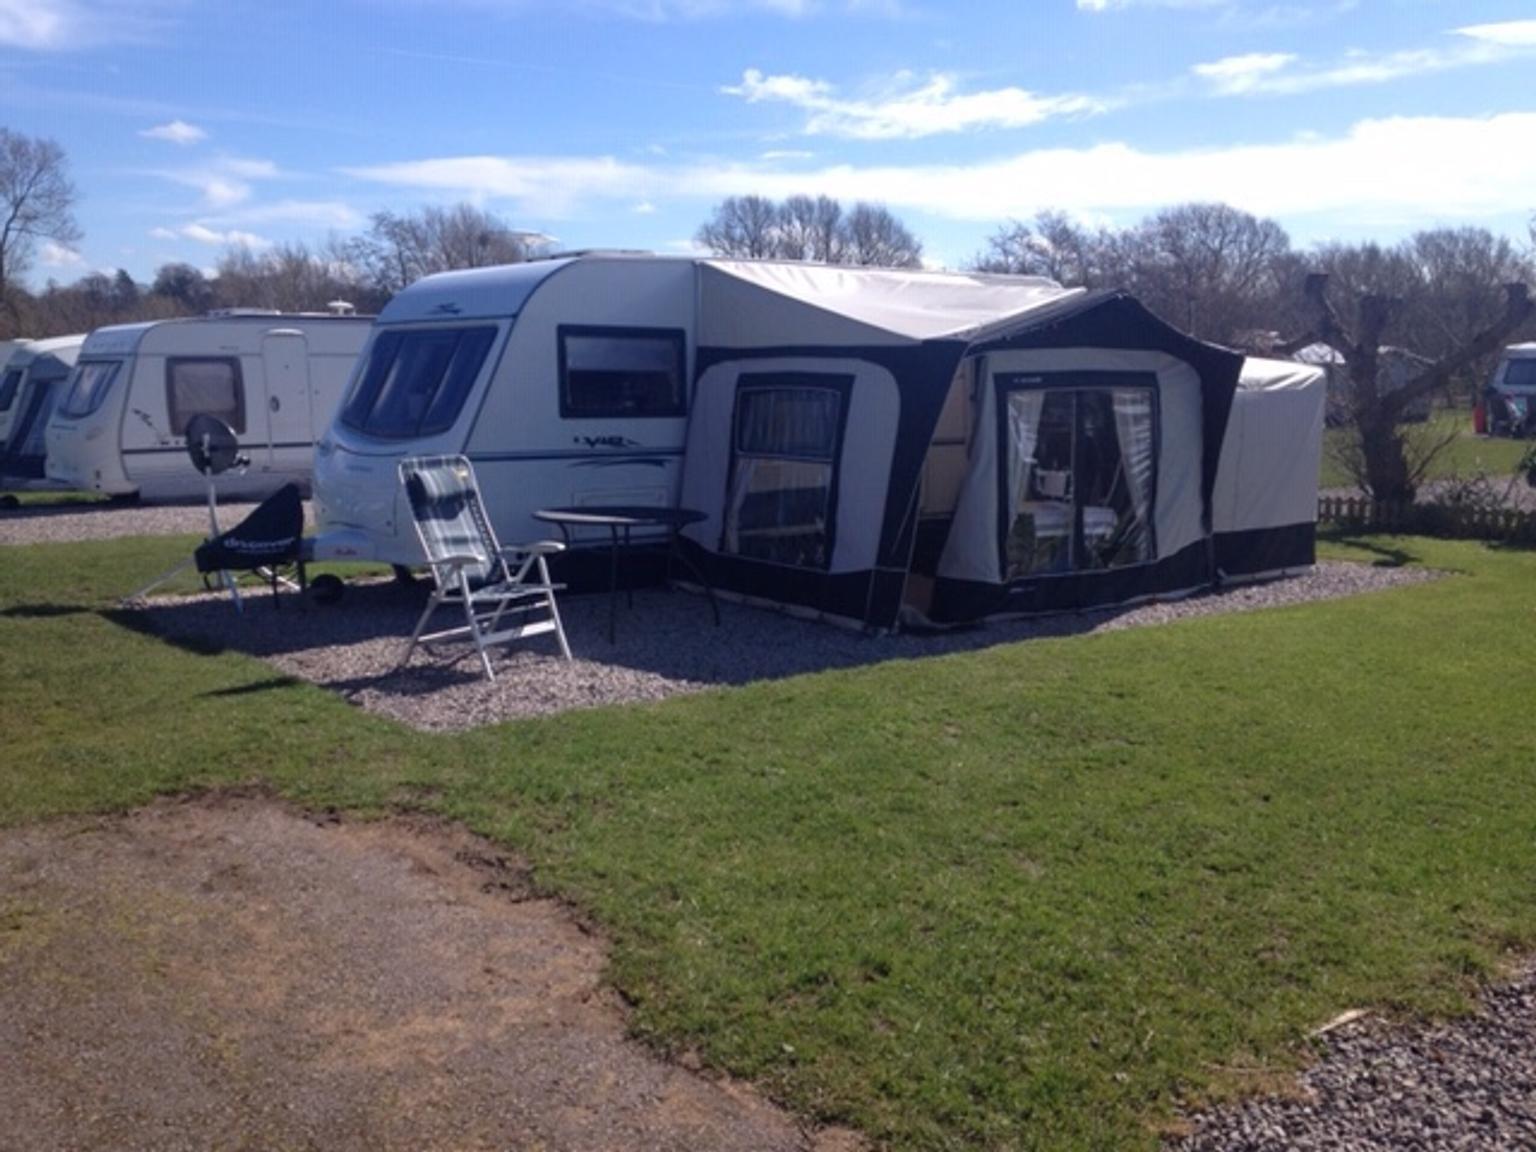 Bradcot Aspire Midi Awning With Bedroom Annex In Ewood For 250 00 For Sale Shpock